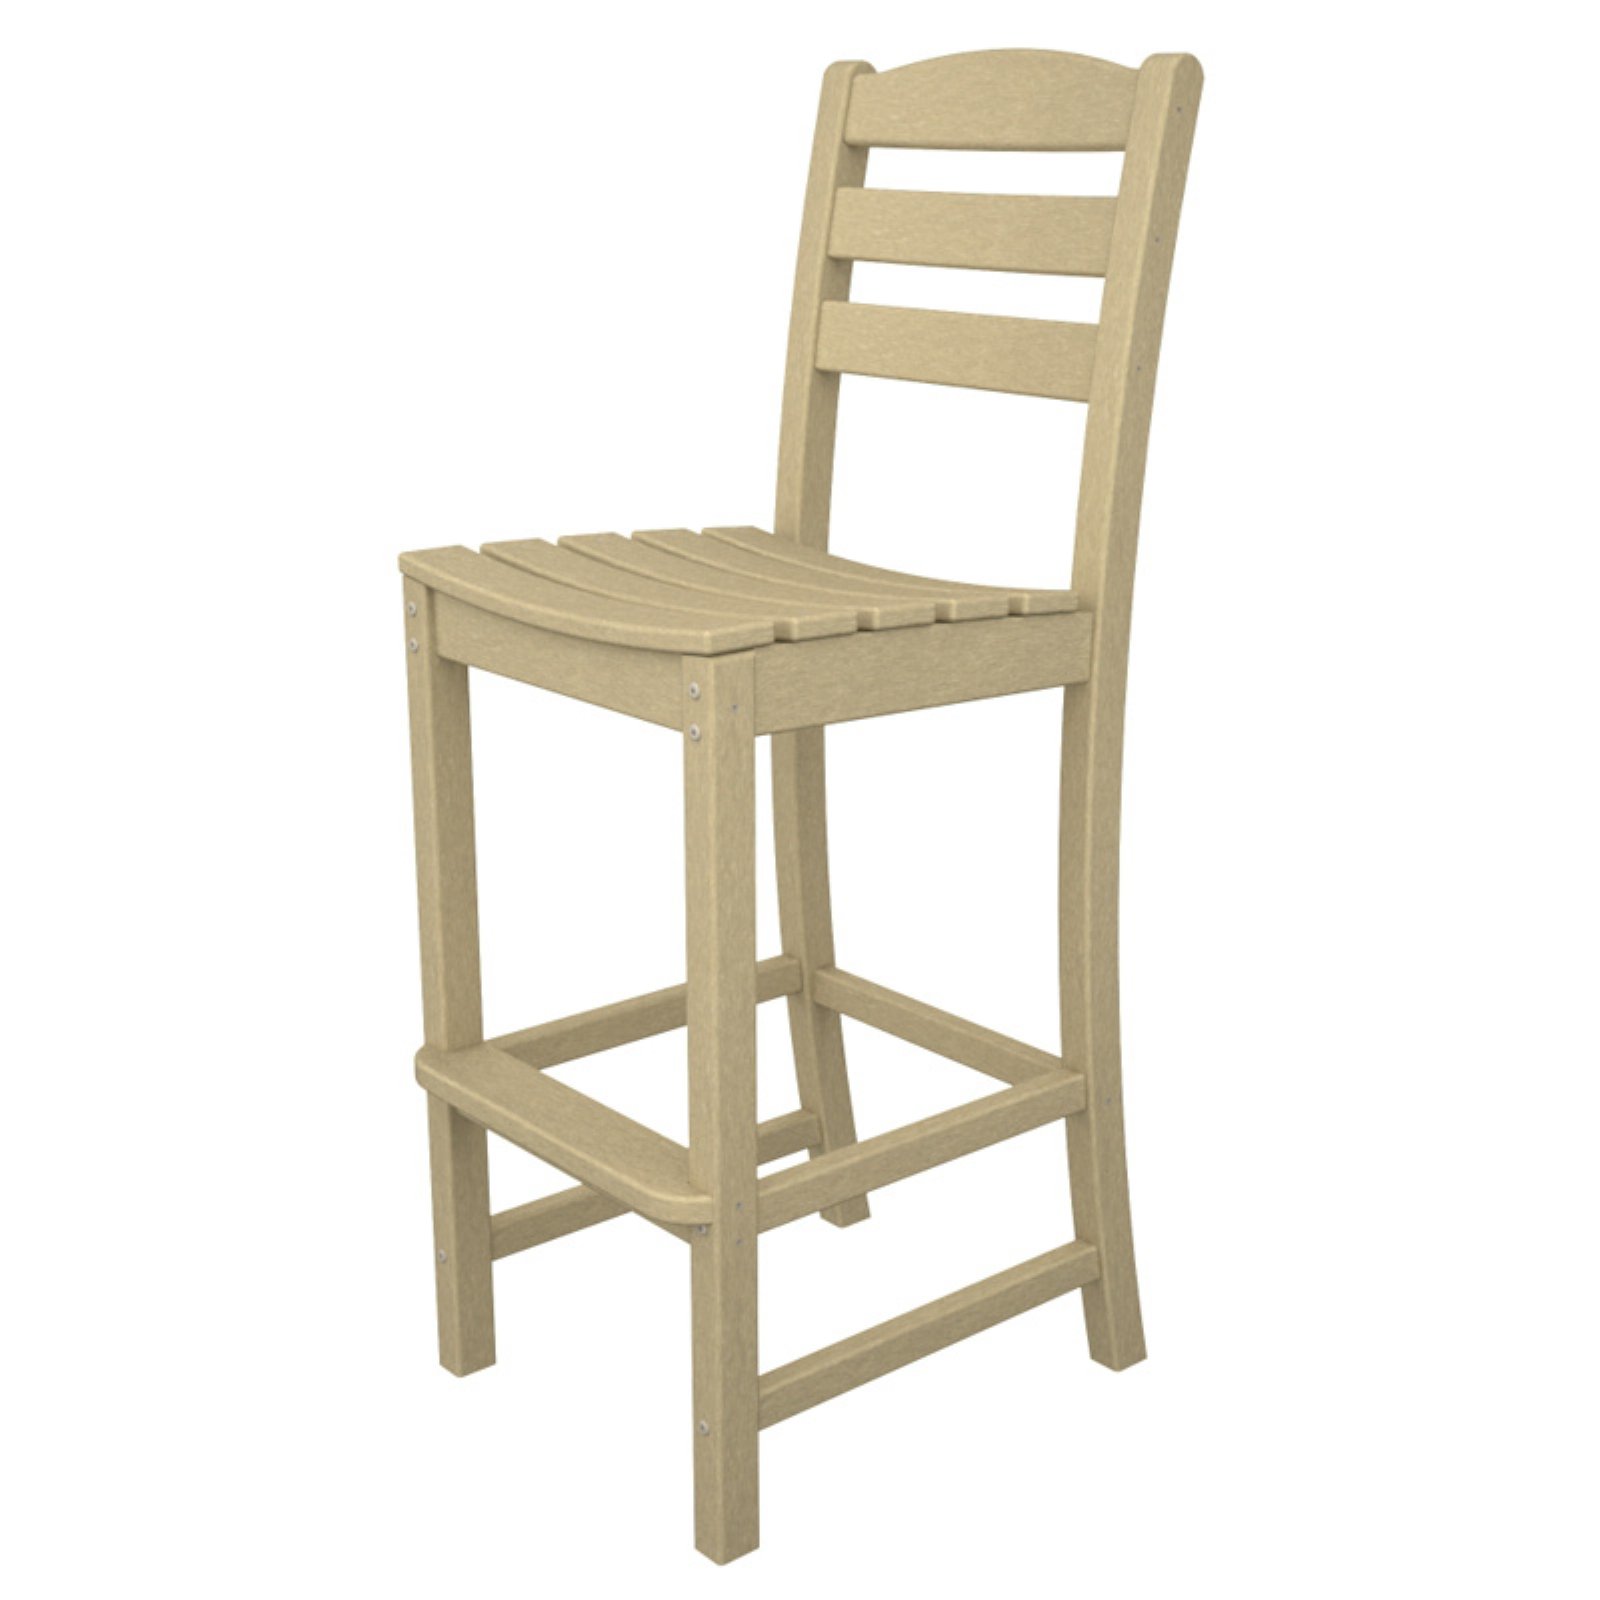 Polywood La Casa Cafe Outdoor Bar Chair in Green - image 2 of 4